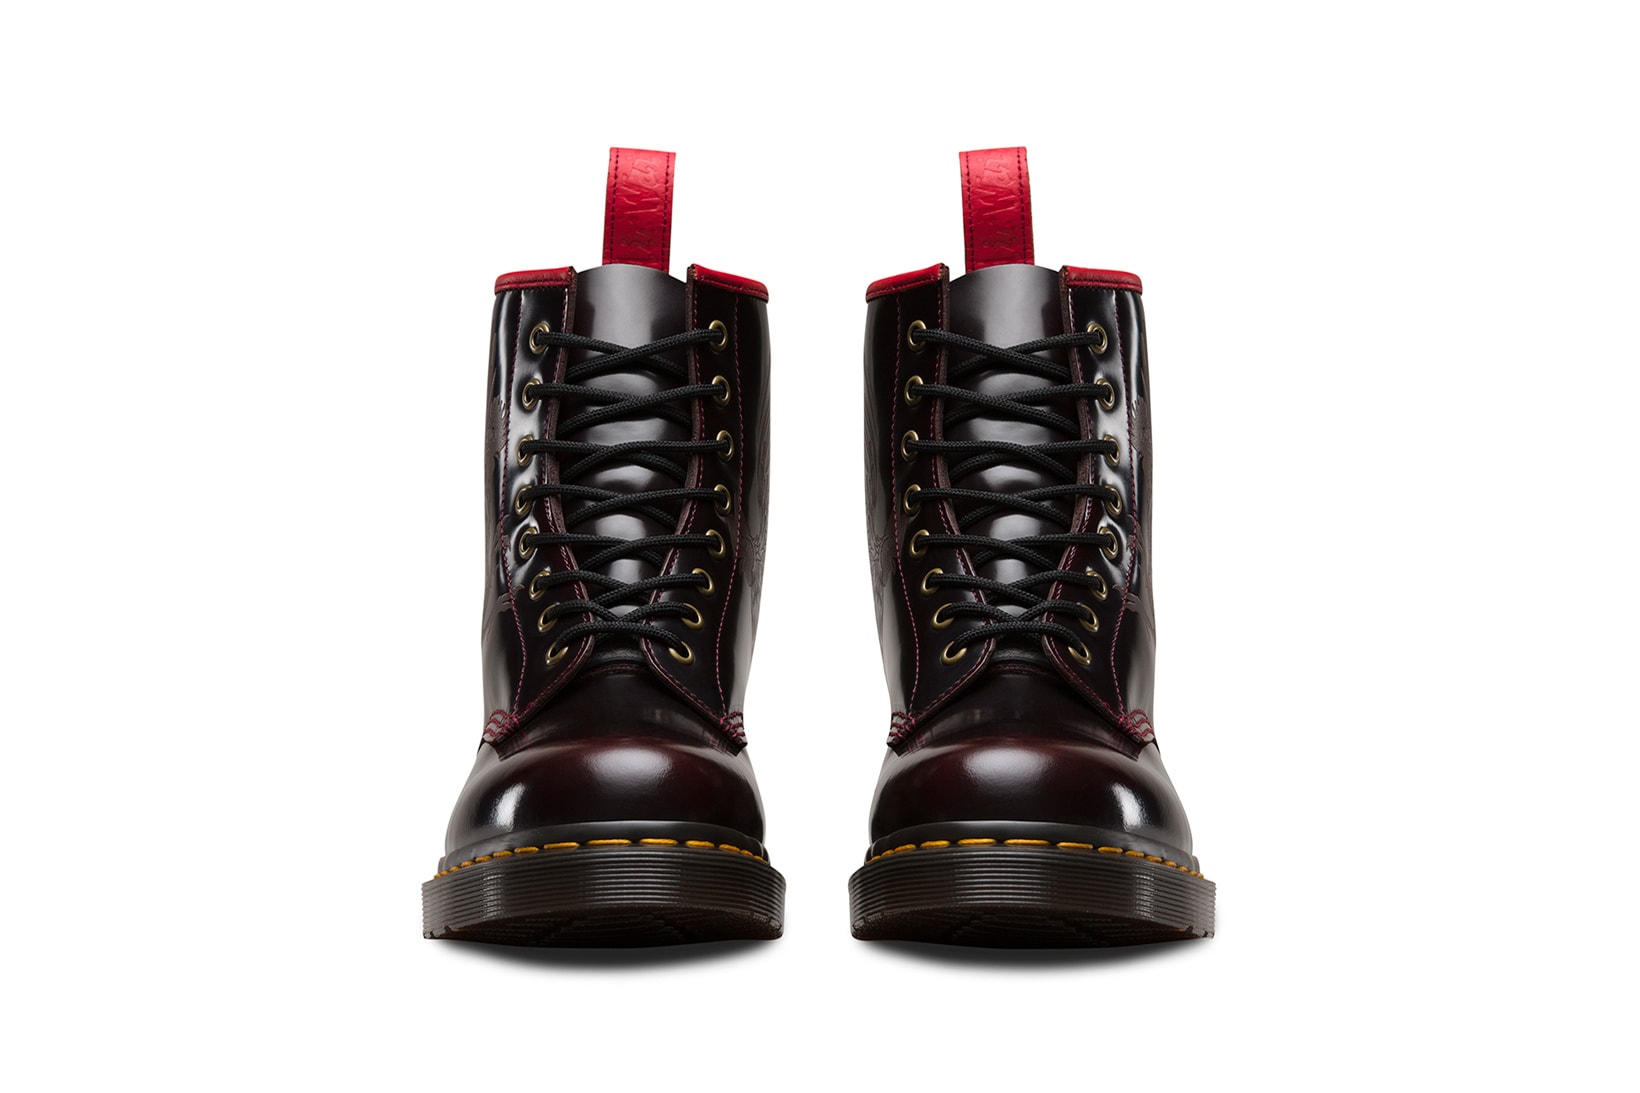 Dr. Martens "Year of the Rooster" 1460 Boot